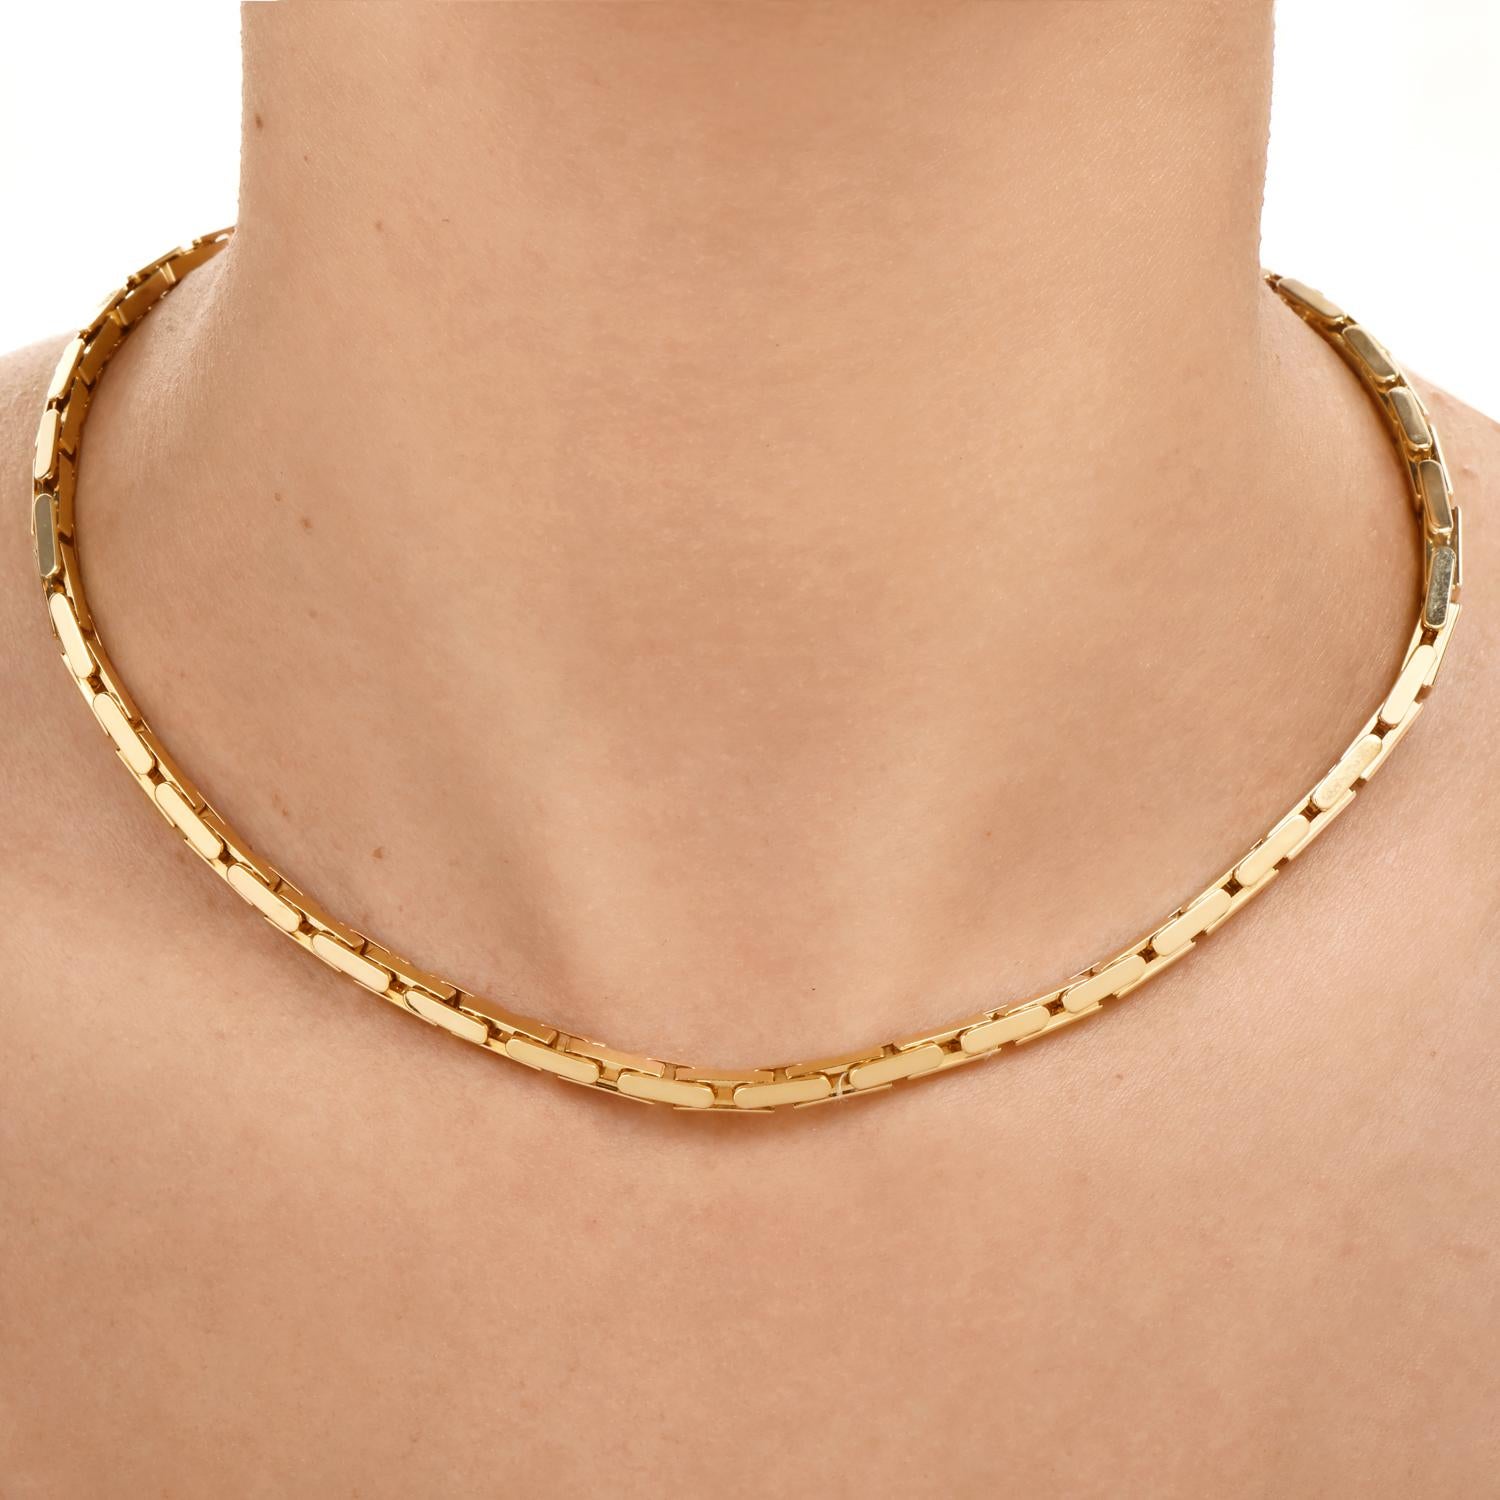 This Vintage Cartier Agrafe is an exquisite piece inspired by the classic heavy gold design chain Necklace.

Crafted in solid 18K Yellow Gold, with polished articulated chunky bar chain design, with a fold-over clasp.

They bear the designer's